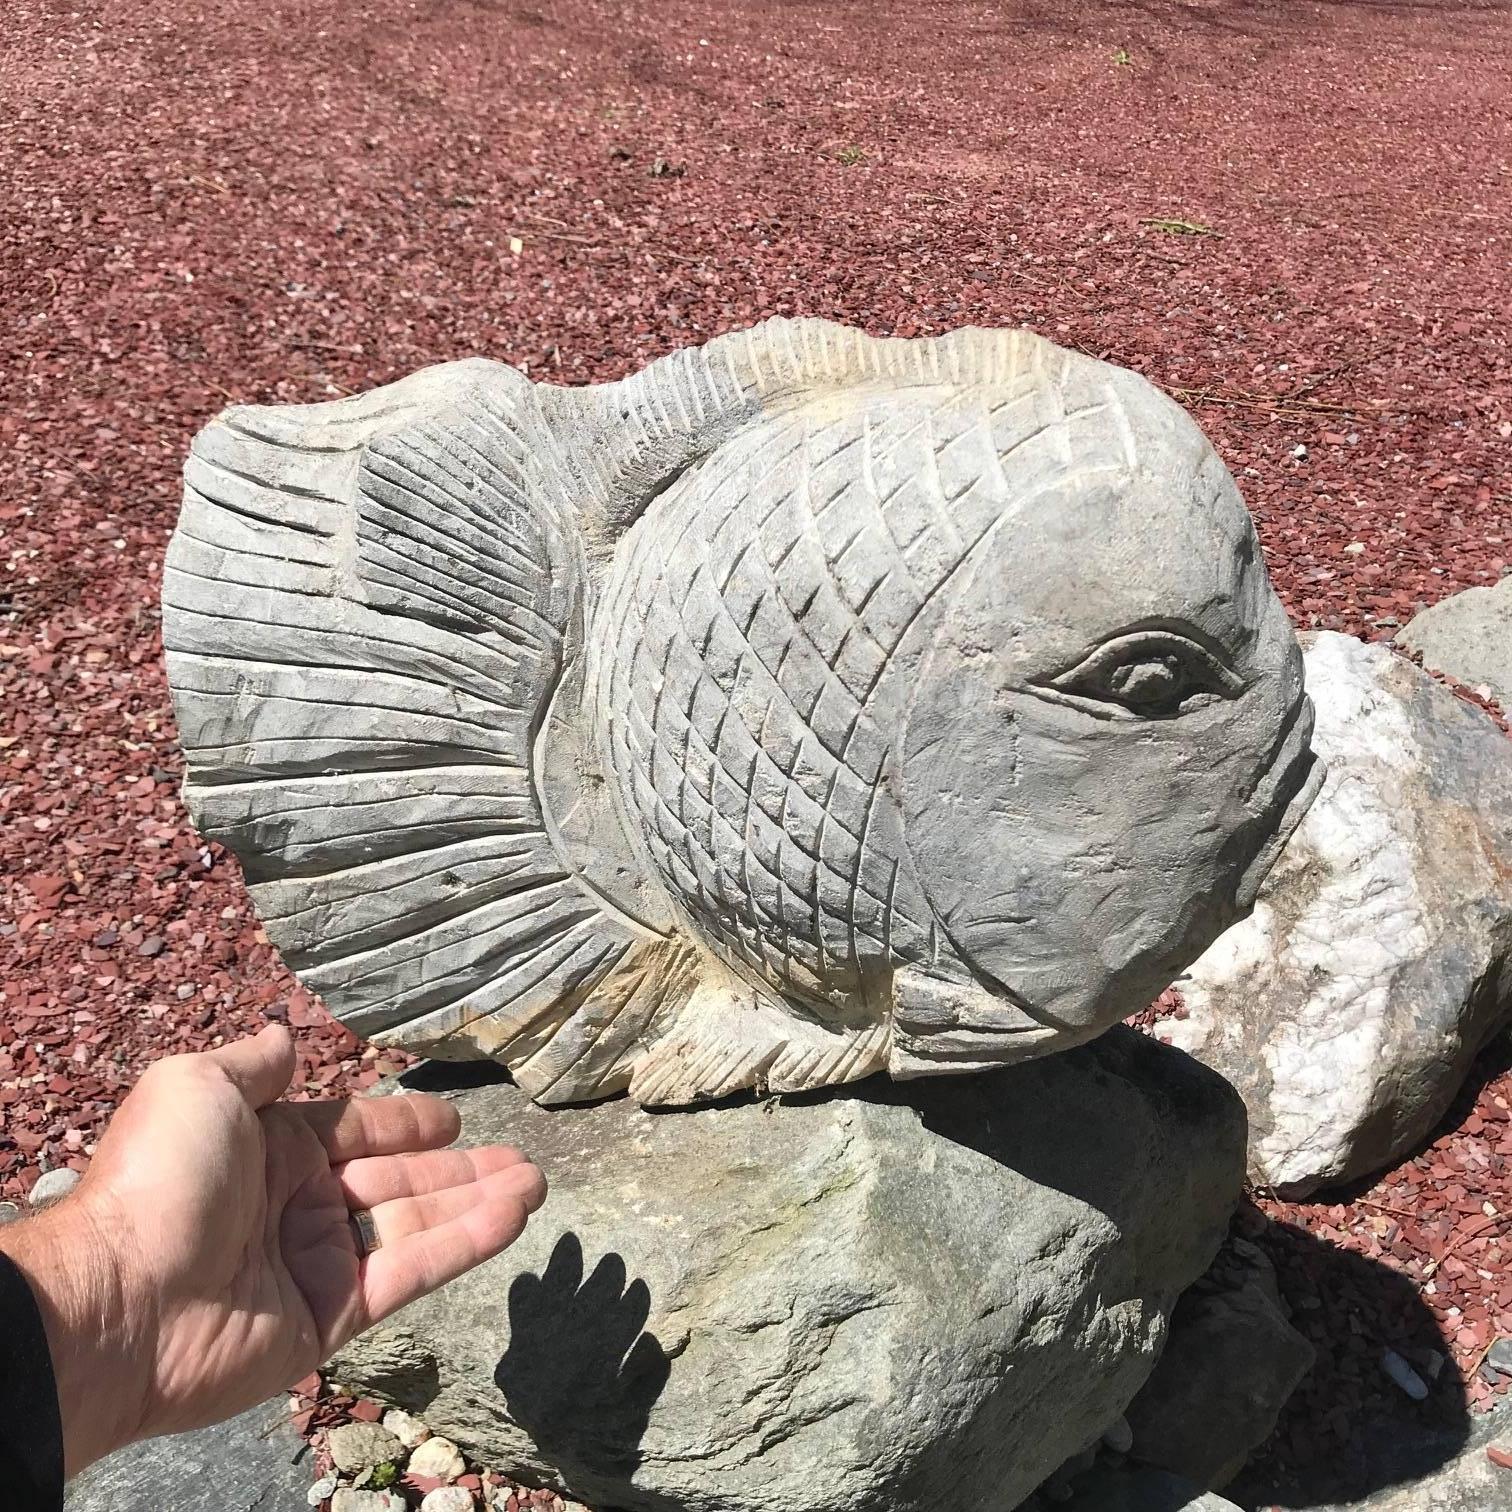 Here's a substantial and attractive hand-carved stone fish that might grace your favourite garden spot, koi pond, or indoor fisherman themed space.

This was sourced from an American garden collection this past year.

Quality: Fine smoothly carved